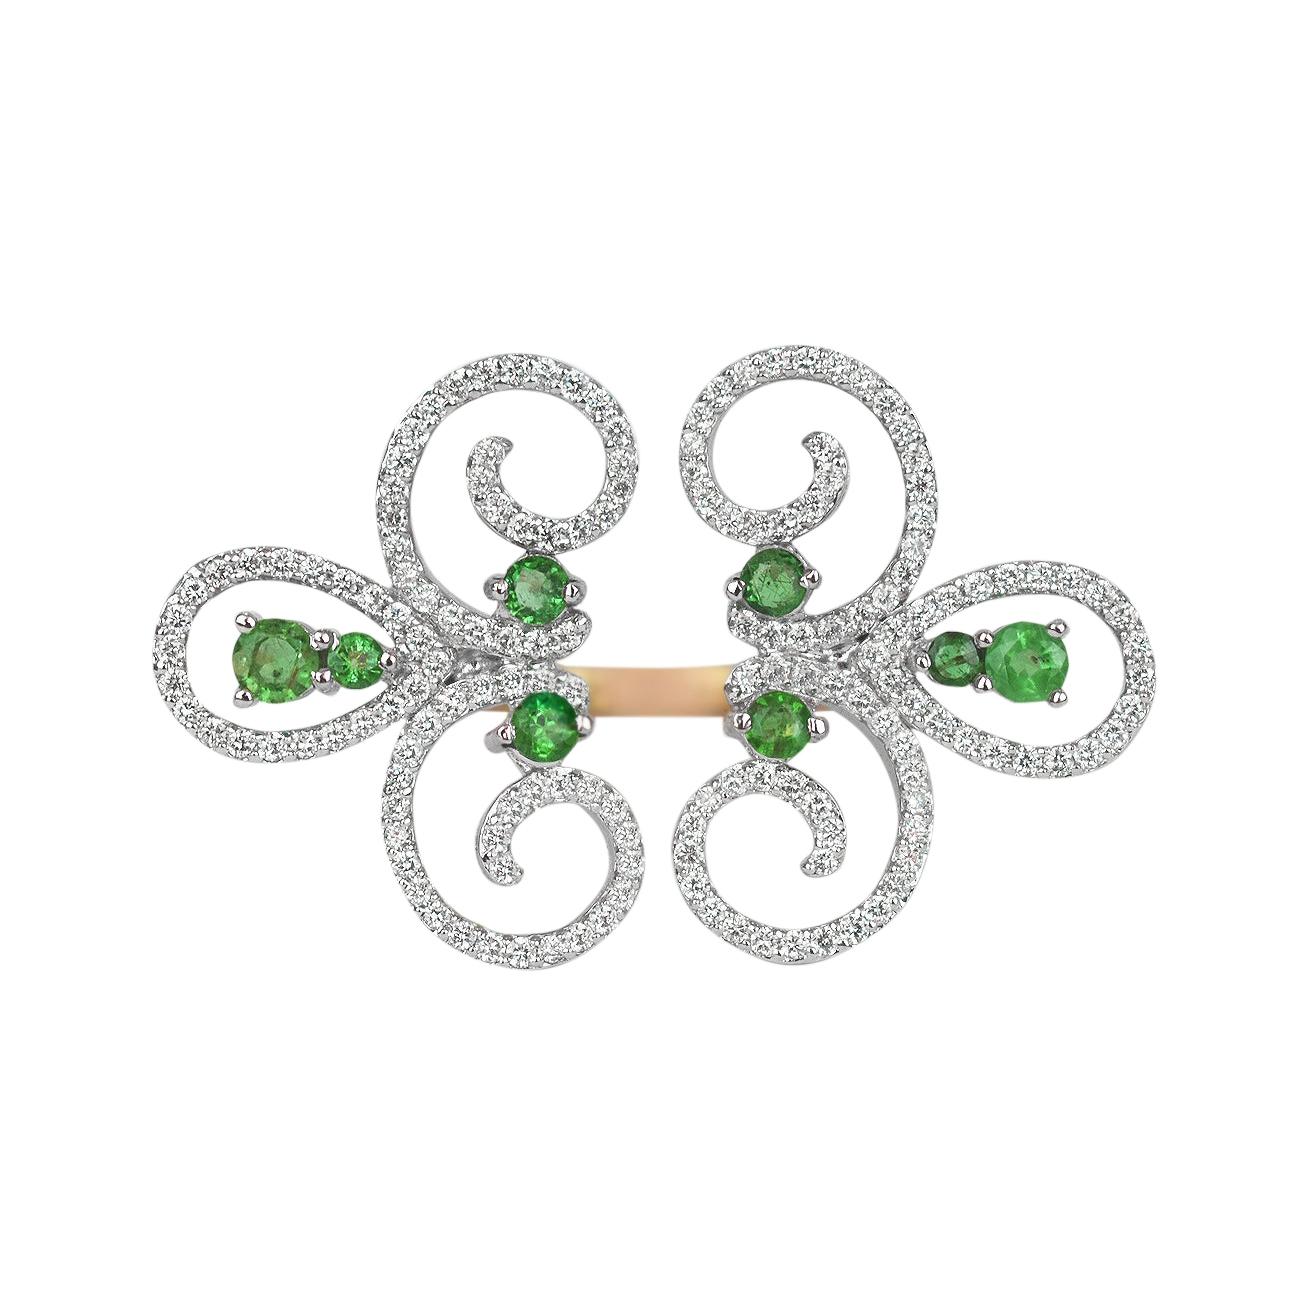 18k Ring 2 Tone Ring White & Rose Gold Ring Diamond Ring  Emerald  Ring Emerald Rounds Ring  2 Tone Gold Fancy Ring
   A fashion Art Nouveau floral ring meticulously crafted to mesmerize. Each part of this art piece shows the passion for jewelry